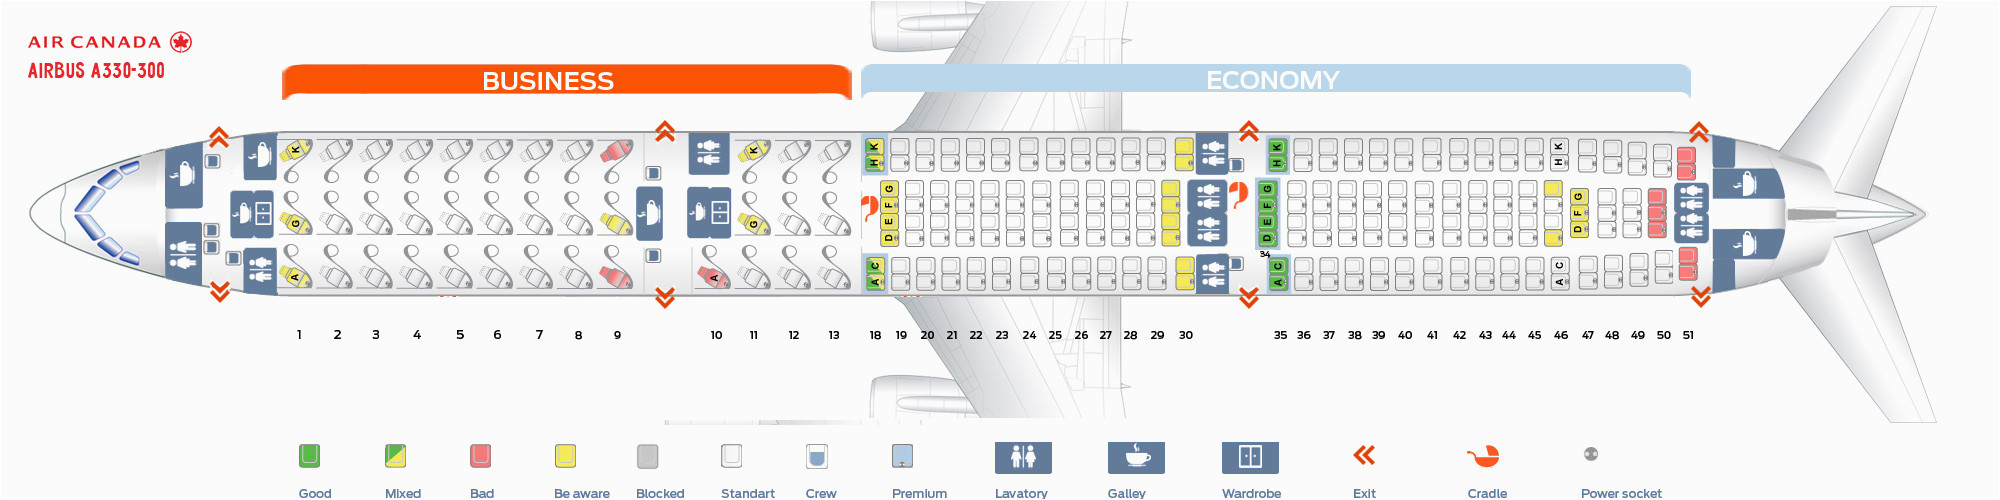 Air Canada A333 Seat Map Photos Airbus A330 300 333 V2 Drawings Art Gallery